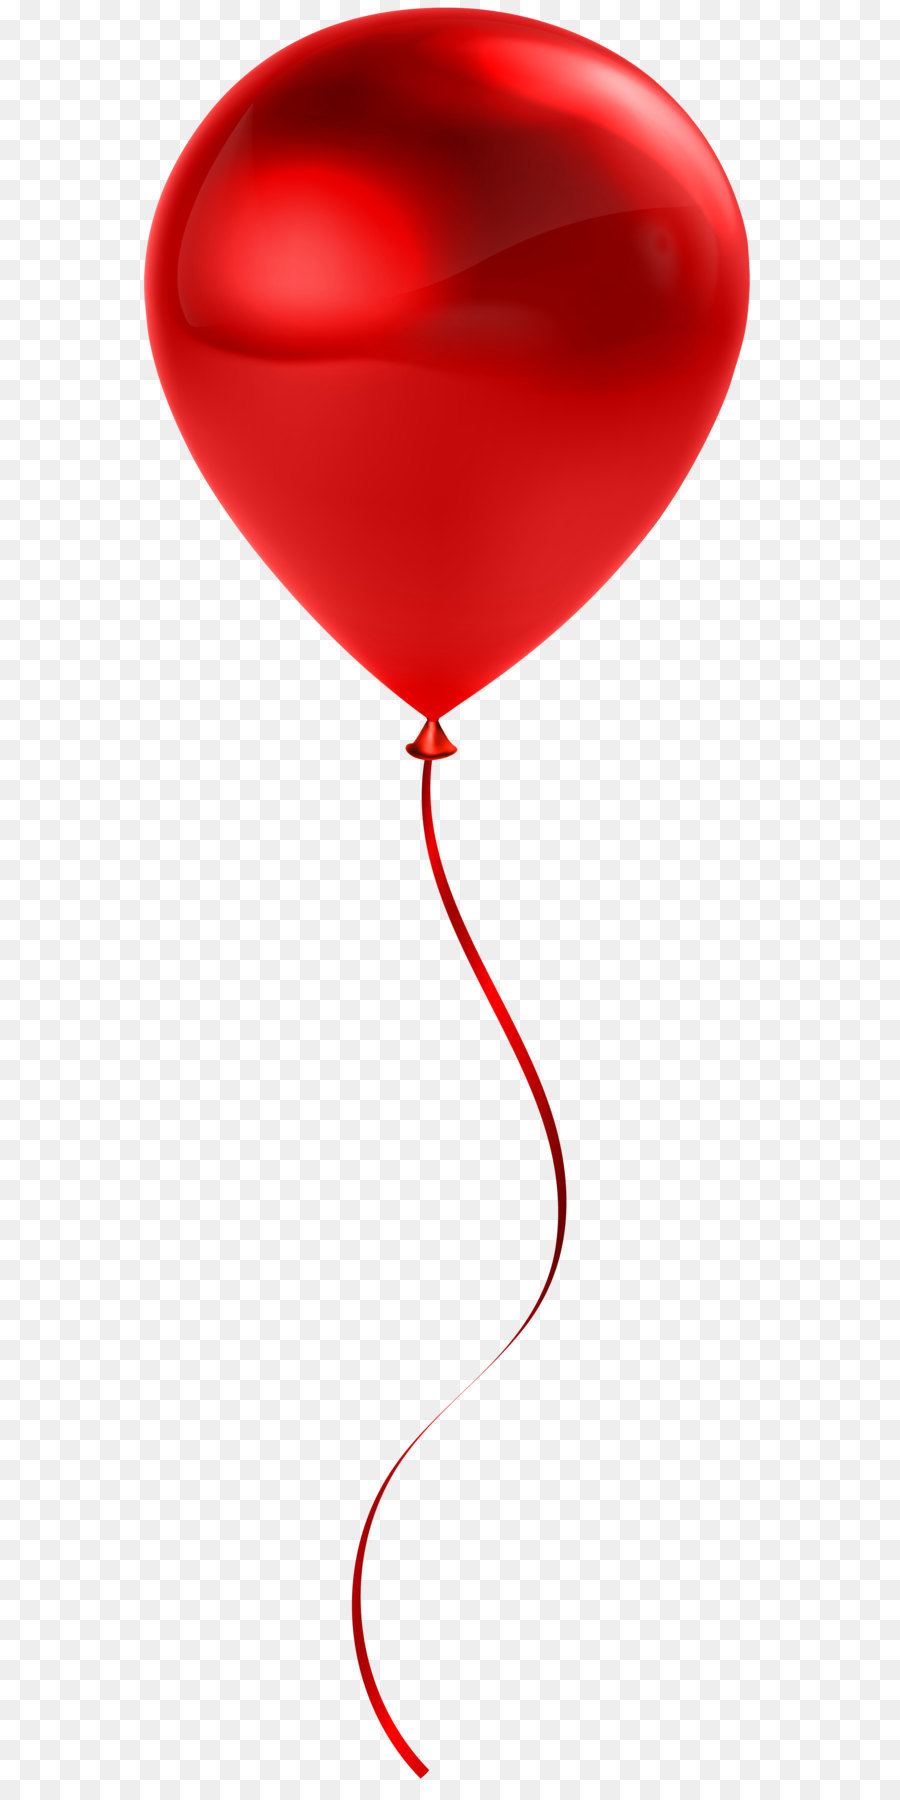 Balloon Clip art - red balloon pattern png download - 2255*2866 - Free ...